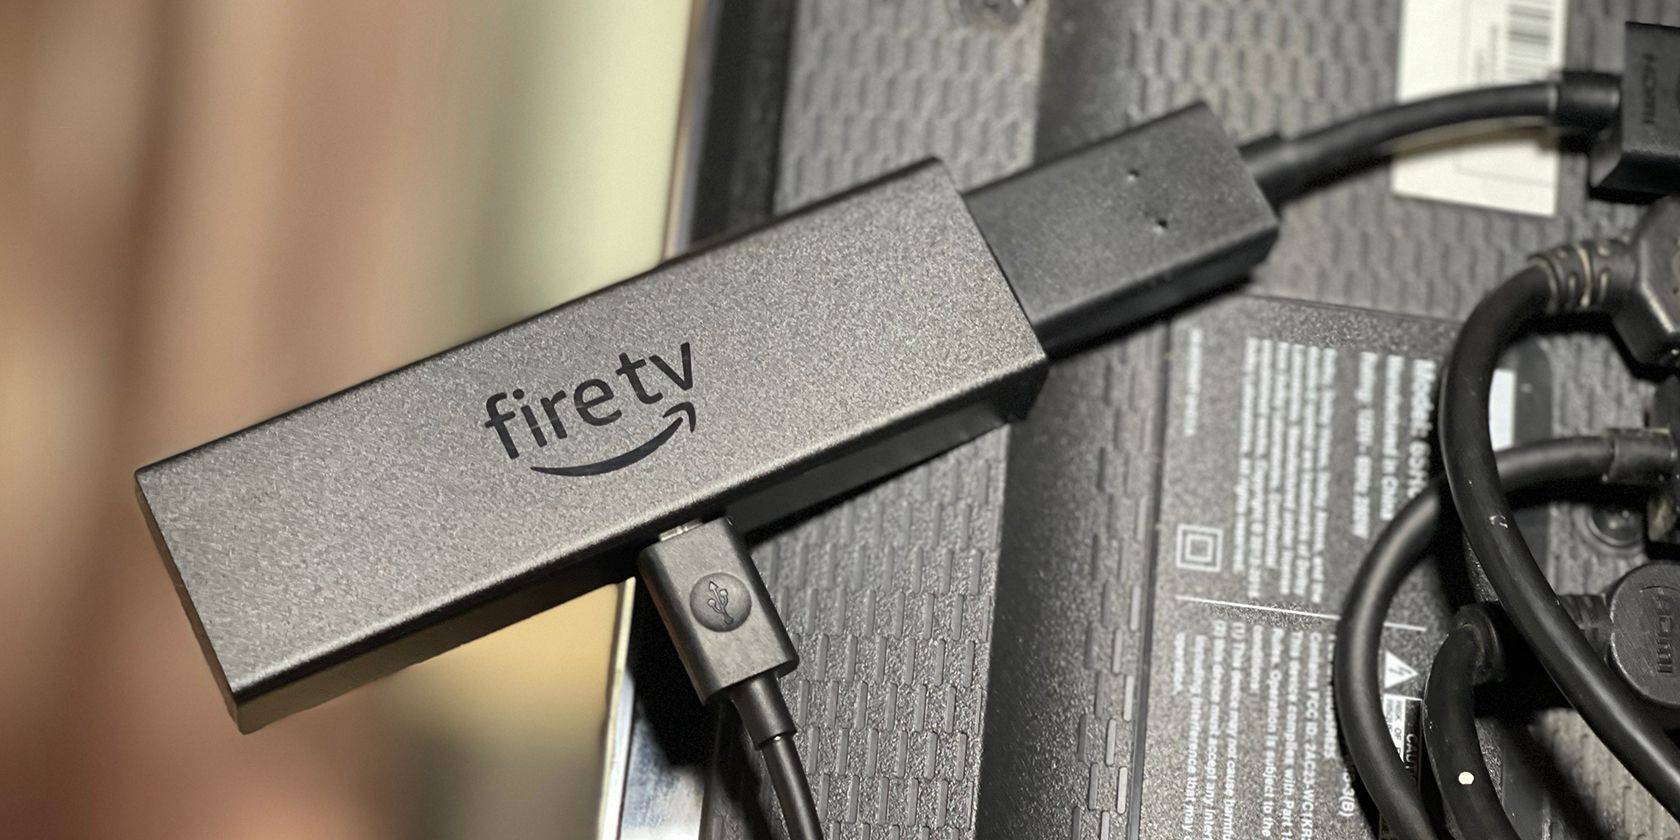 How to Set Up and Use Your Amazon Fire TV Stick